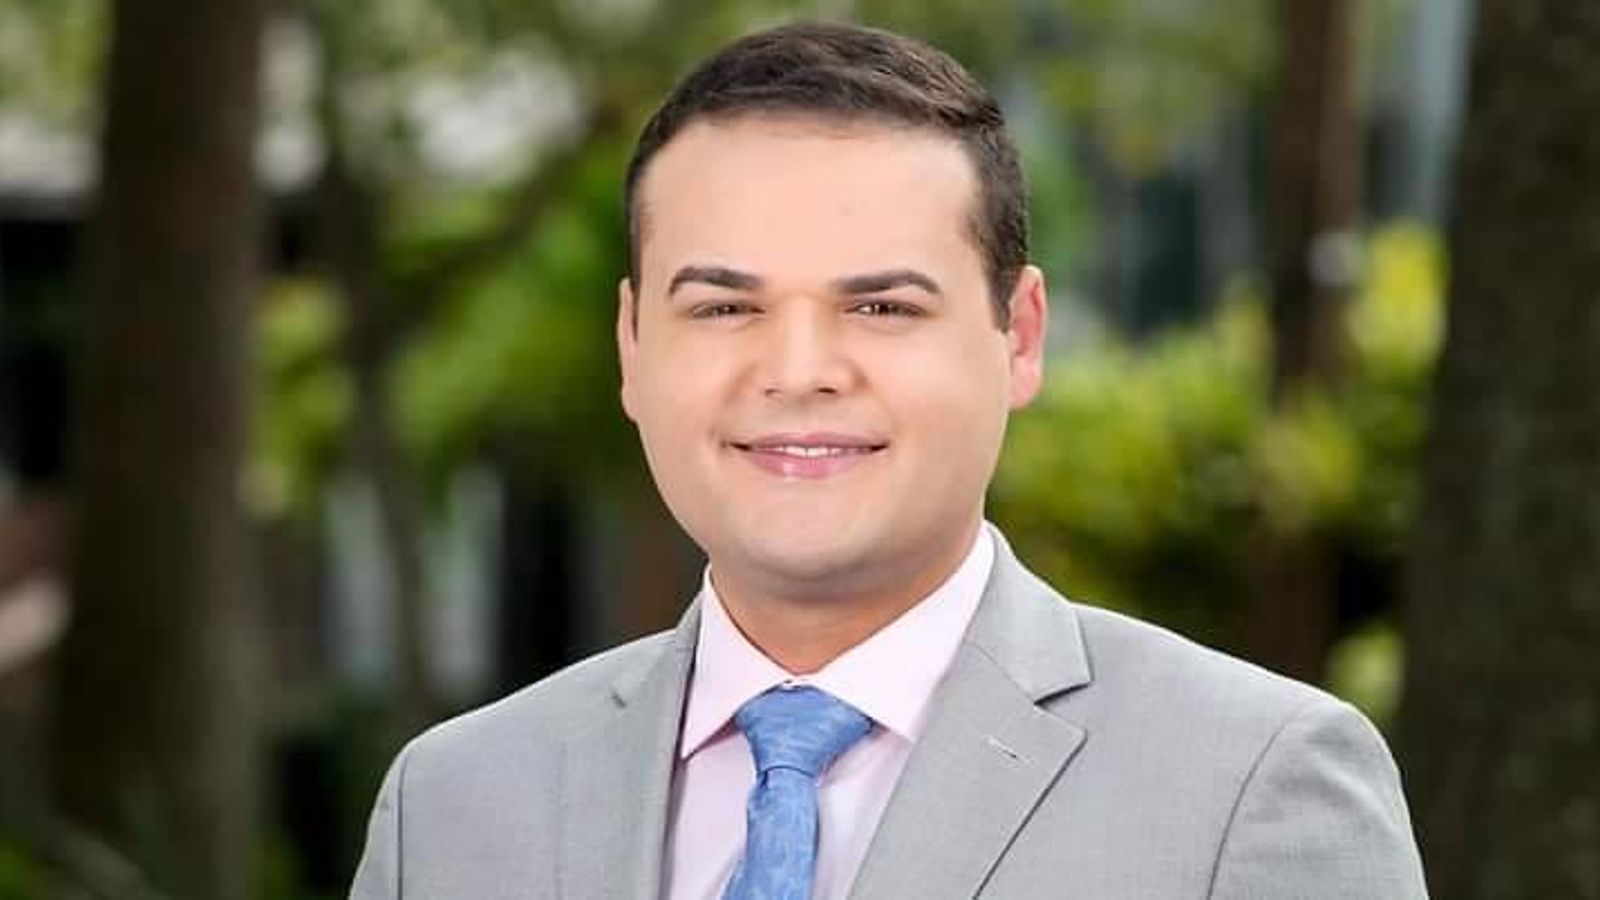 TV journalist Dylan Lyons shot dead while reporting at murder scene in Florida